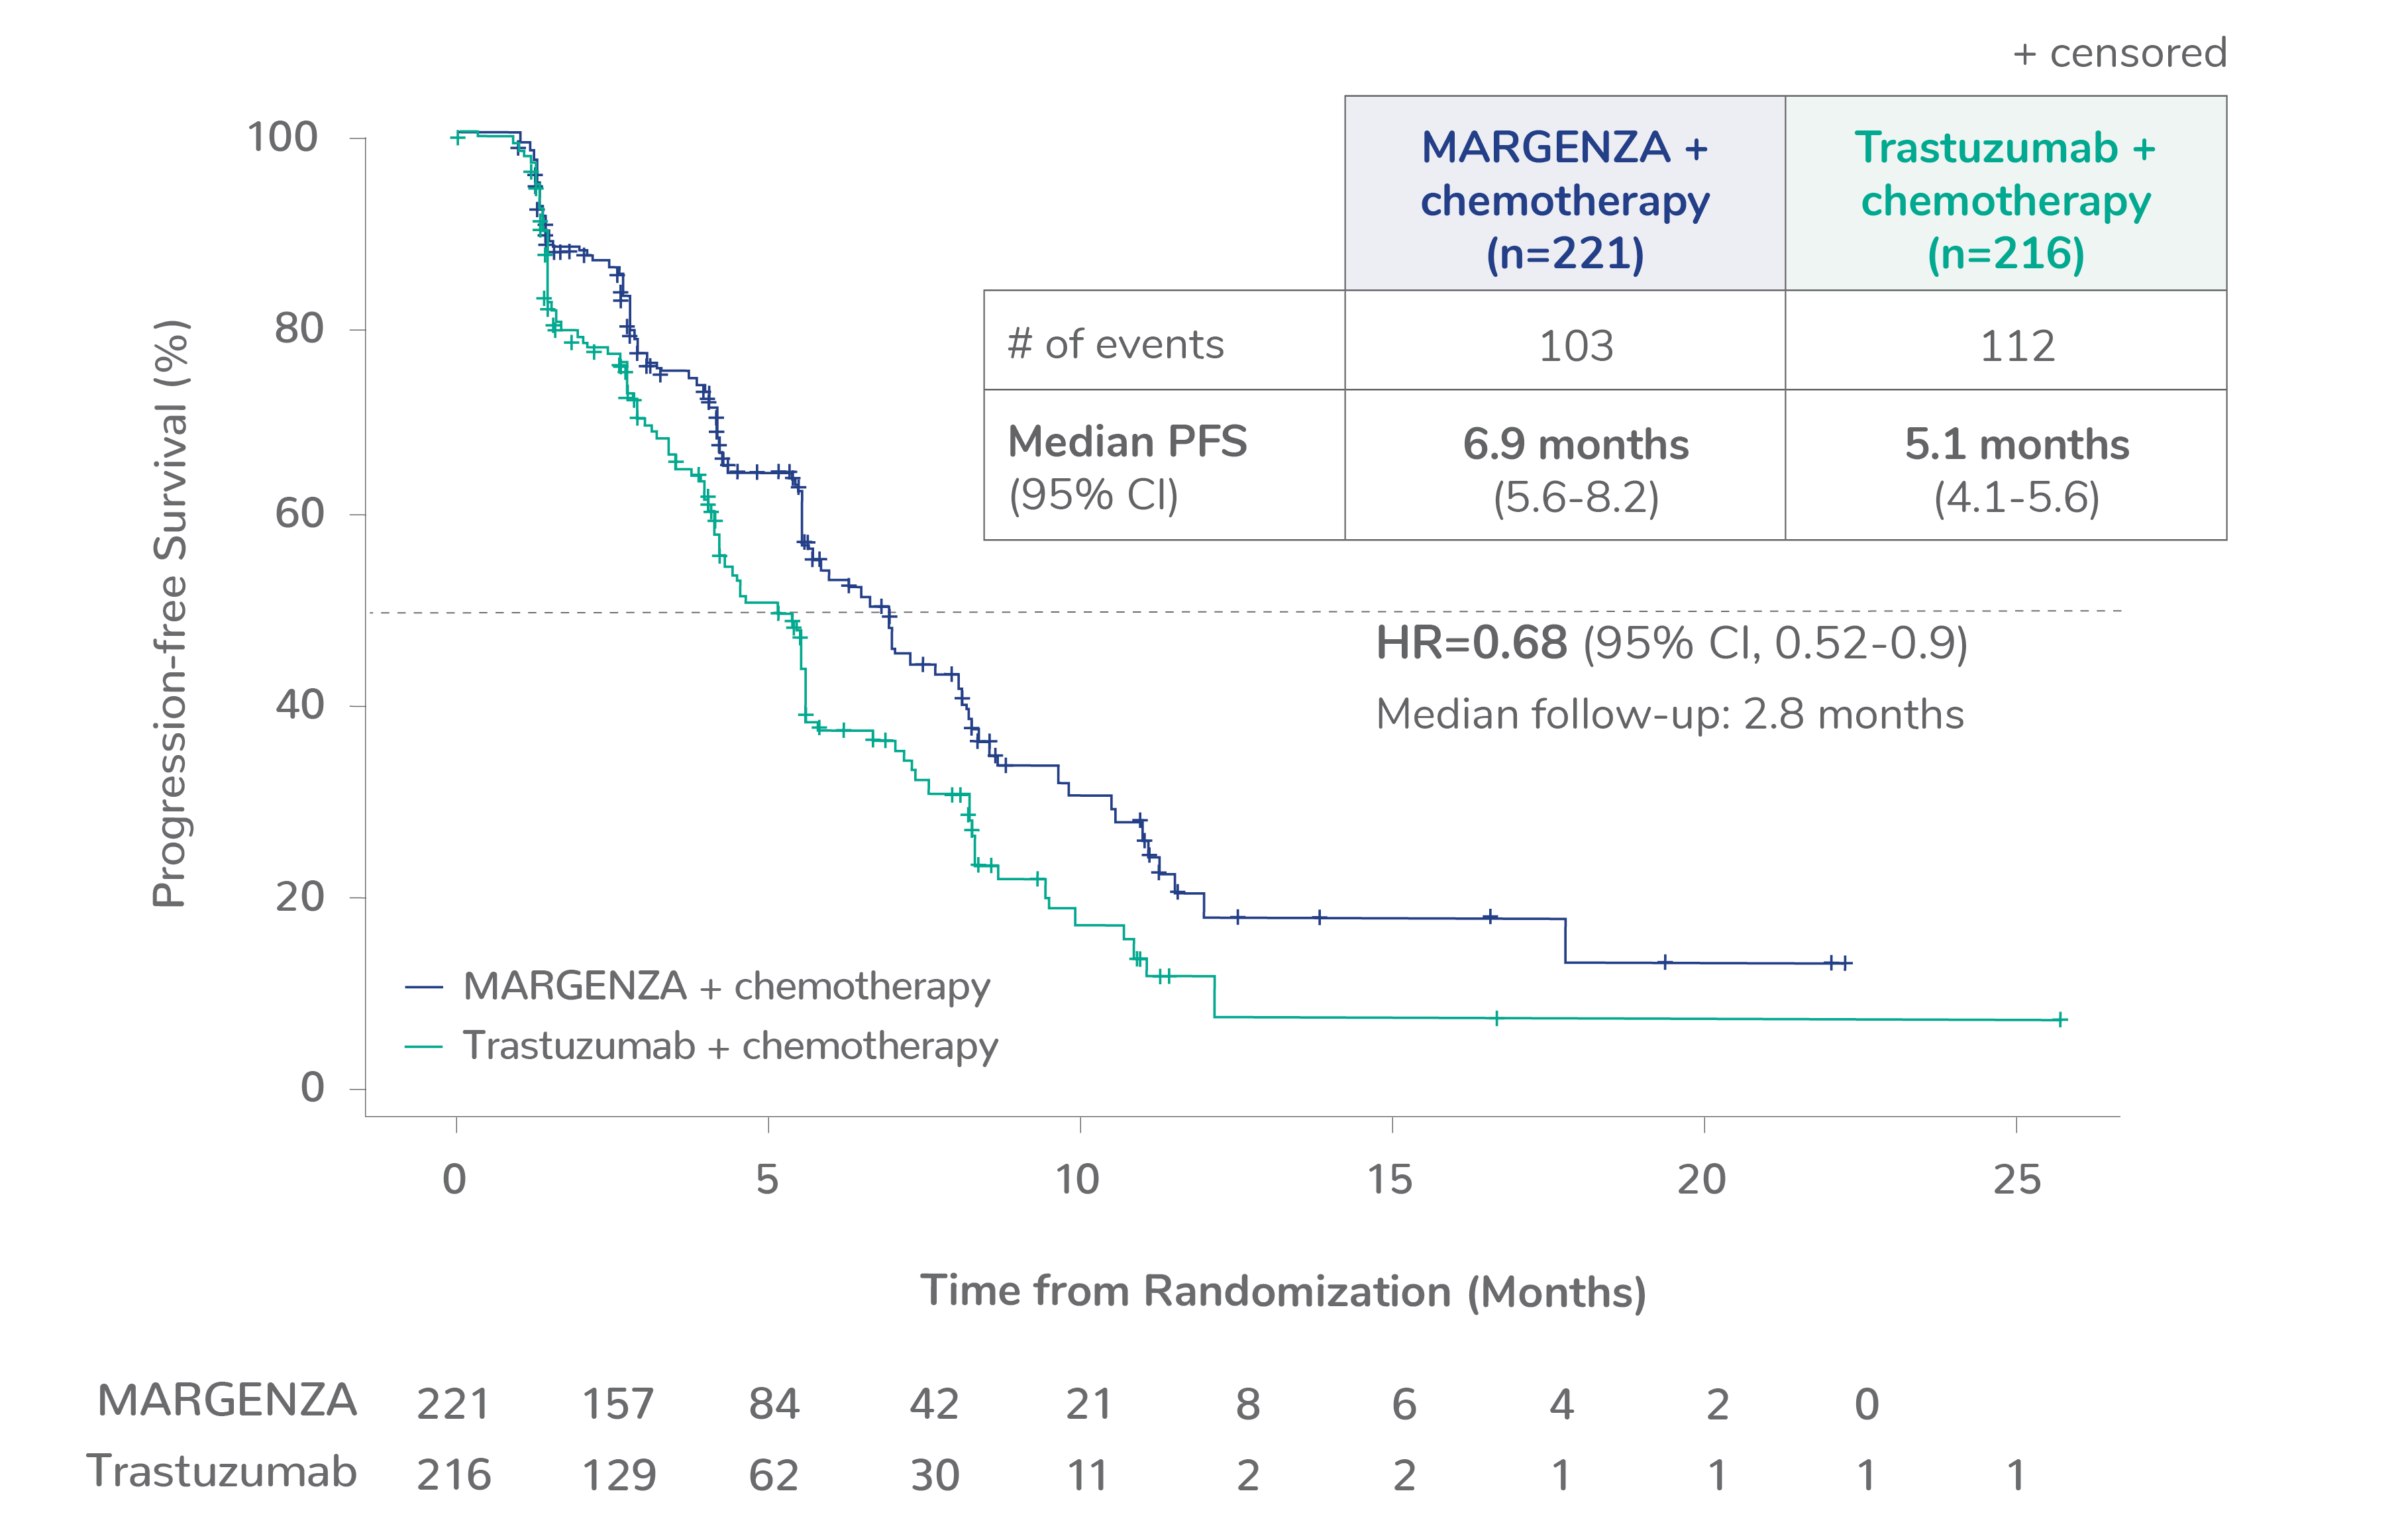 Kaplan Meyer curve showing median progression-free survival for CD16A FF or FV genotypes of 6.8 months for MARGENZA plus chemotherapy in 221 patients compared to 5.1 months for trastuzumab plus chemotherapy in 216 patients. The hazard ratio was 0.68.  